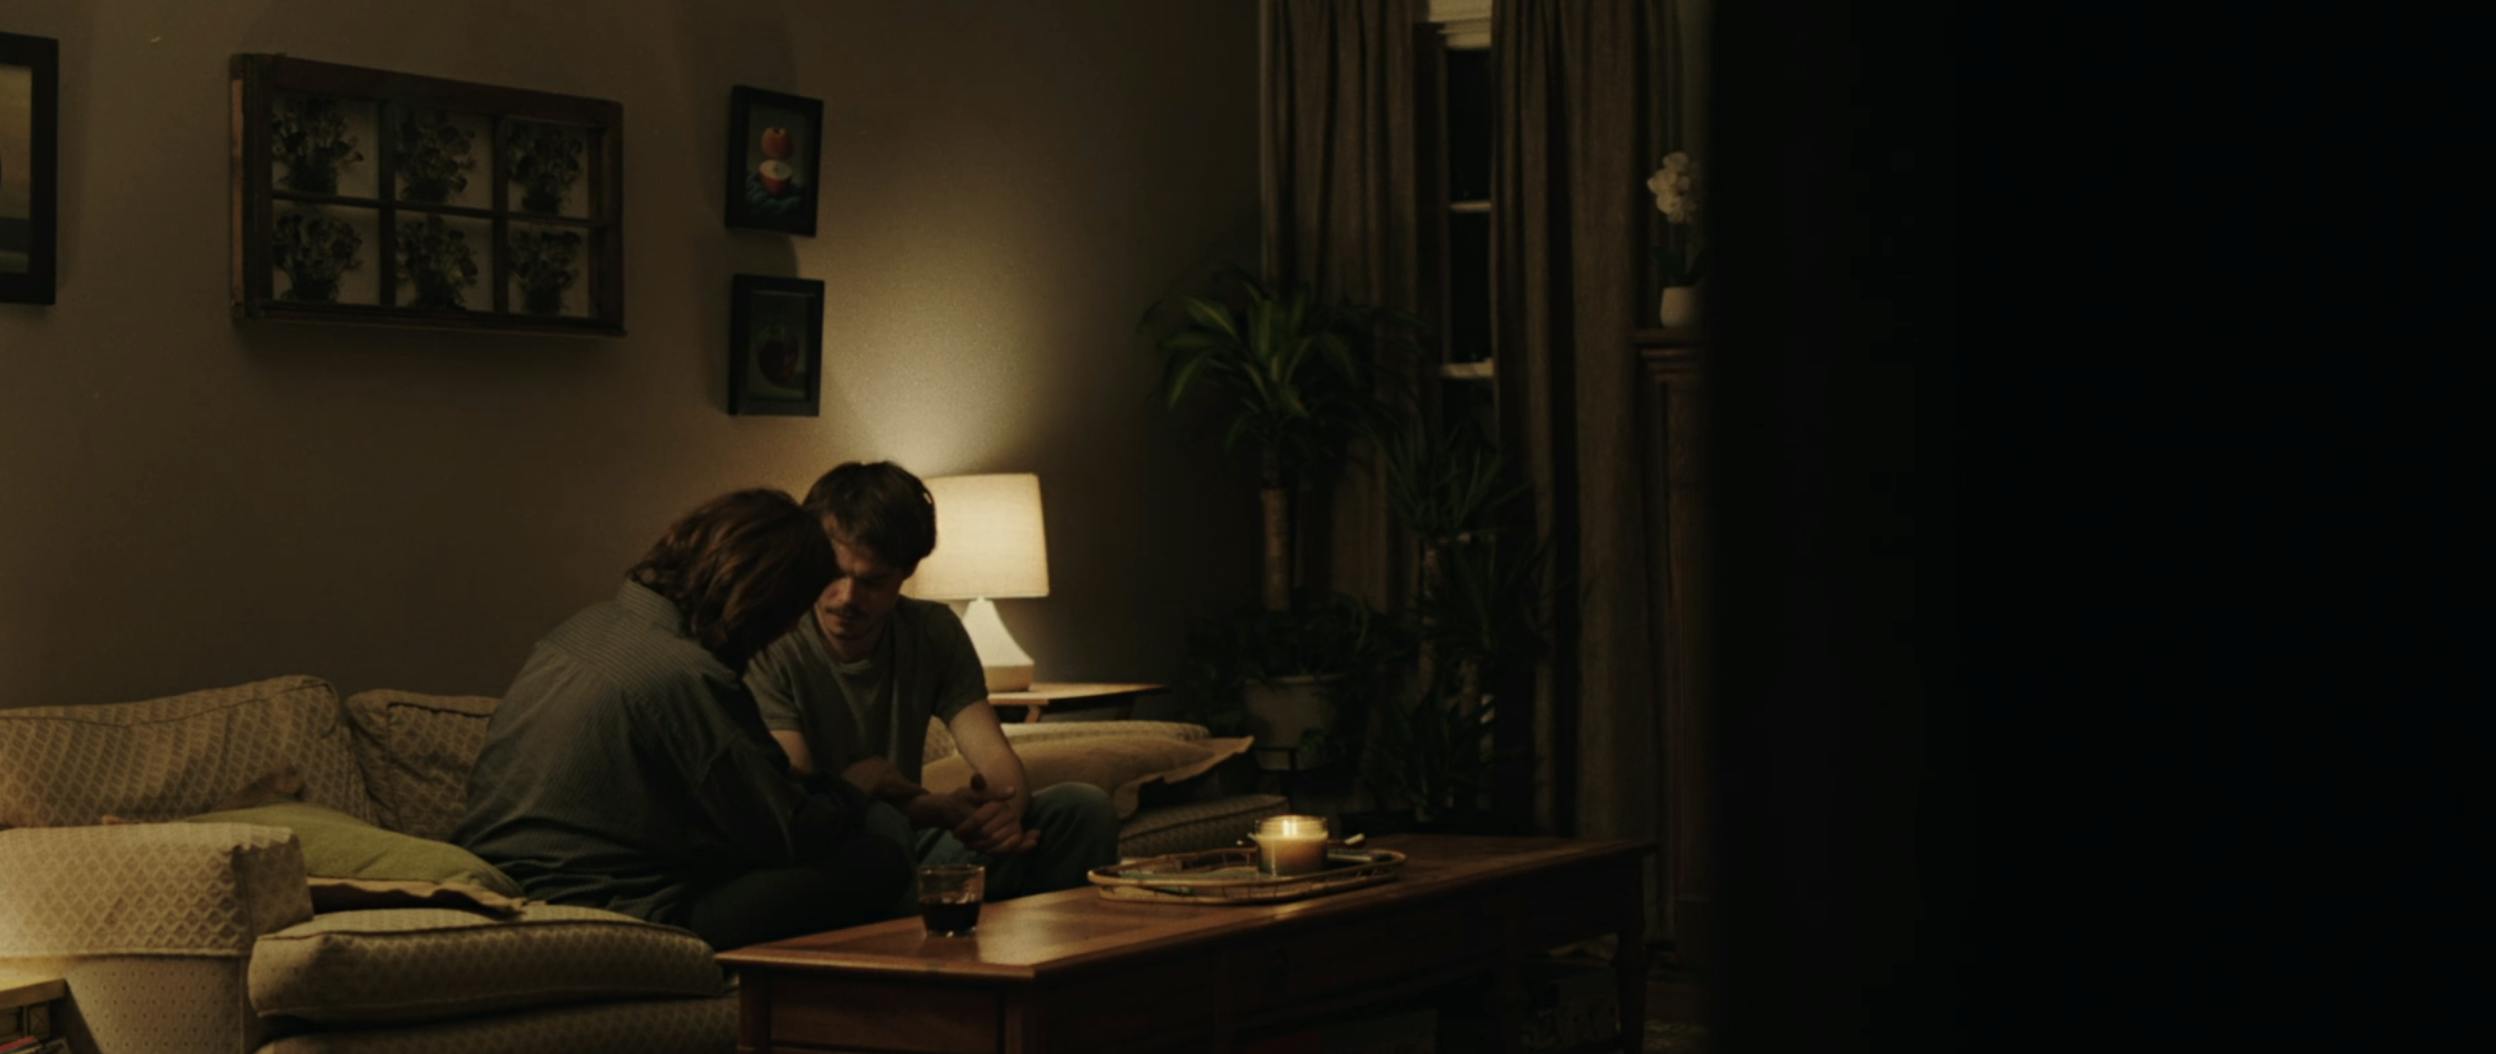 Two people sit on a couch in a dimly lit room